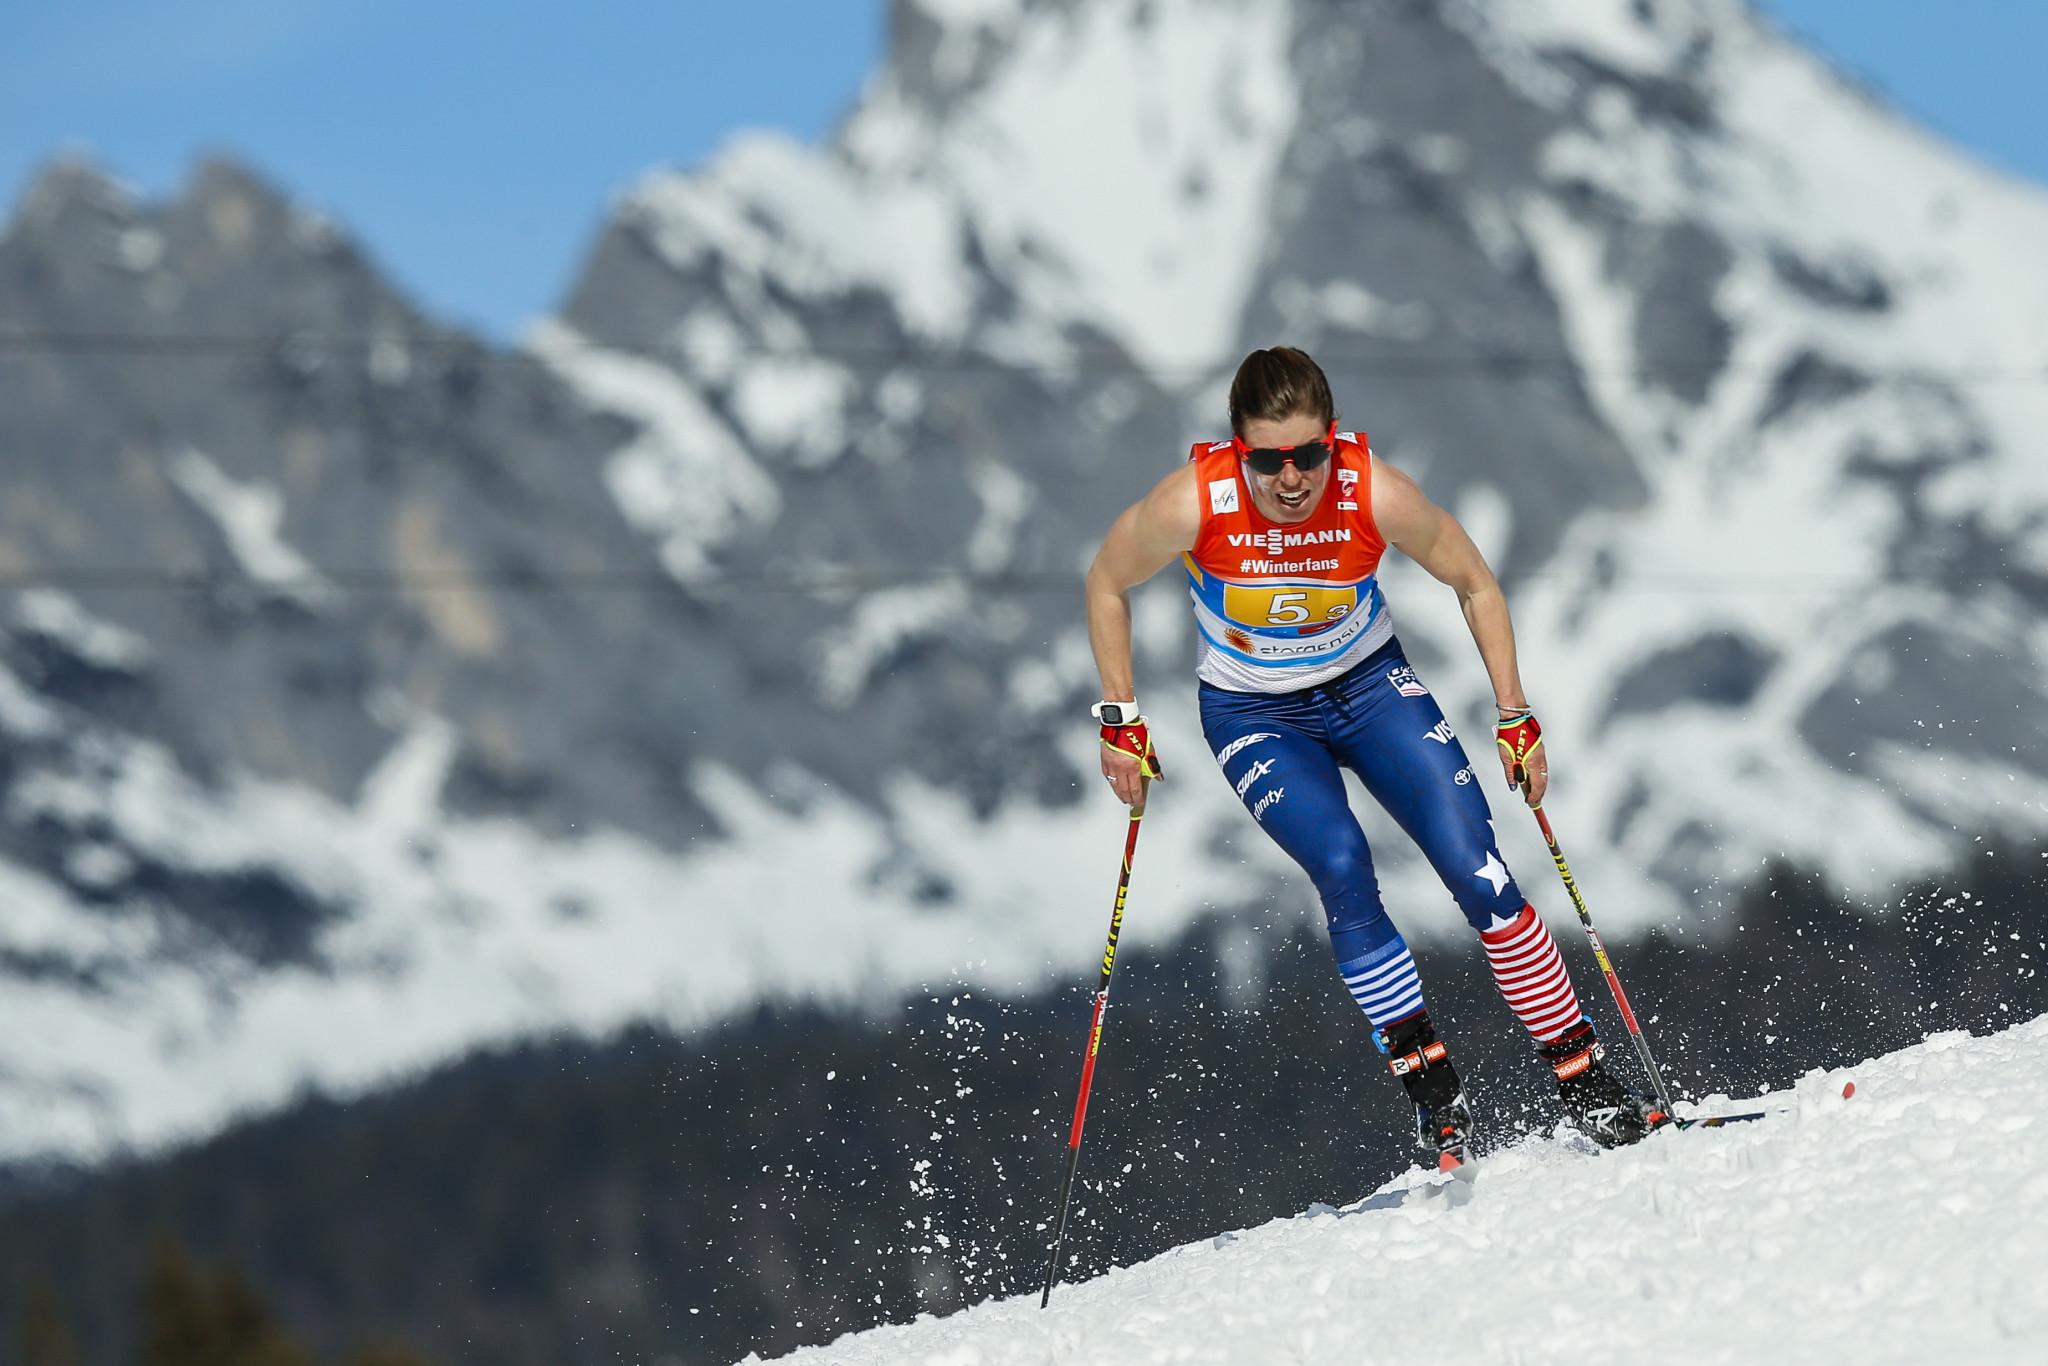 Rosie Brennan of the United States pictured at this year's FIS Nordic World Ski Championships, where she finished 16th after recovering from mononucleosis - an award-winning performance ©Getty Images